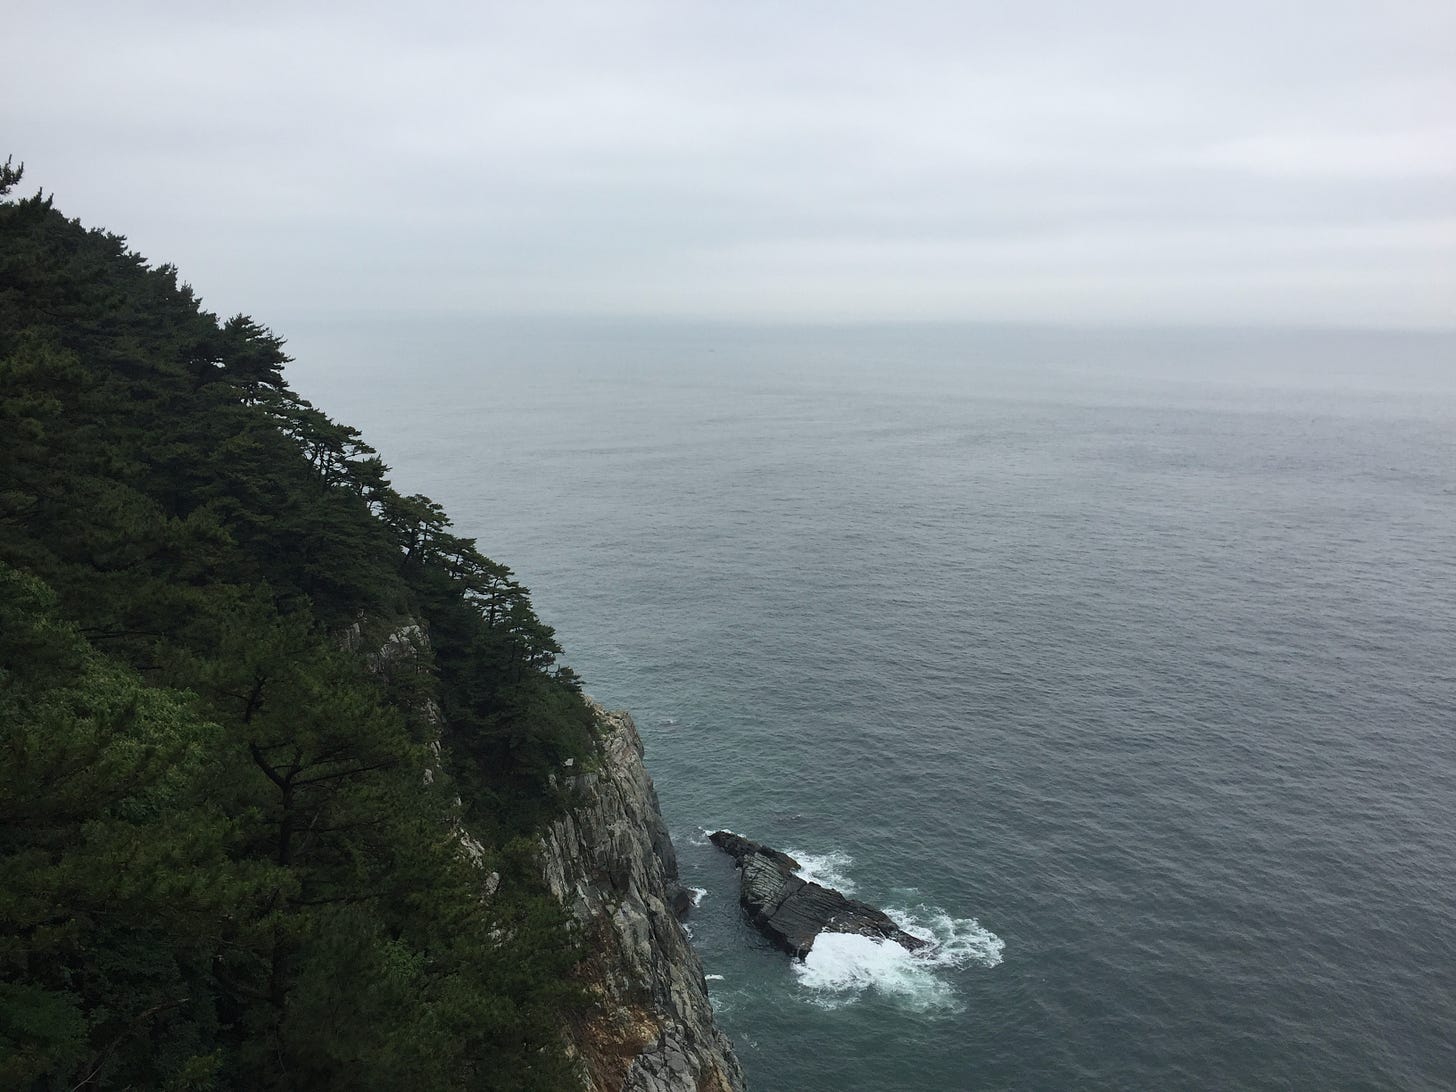 Photo of cliff overlooking ocean on foggy day